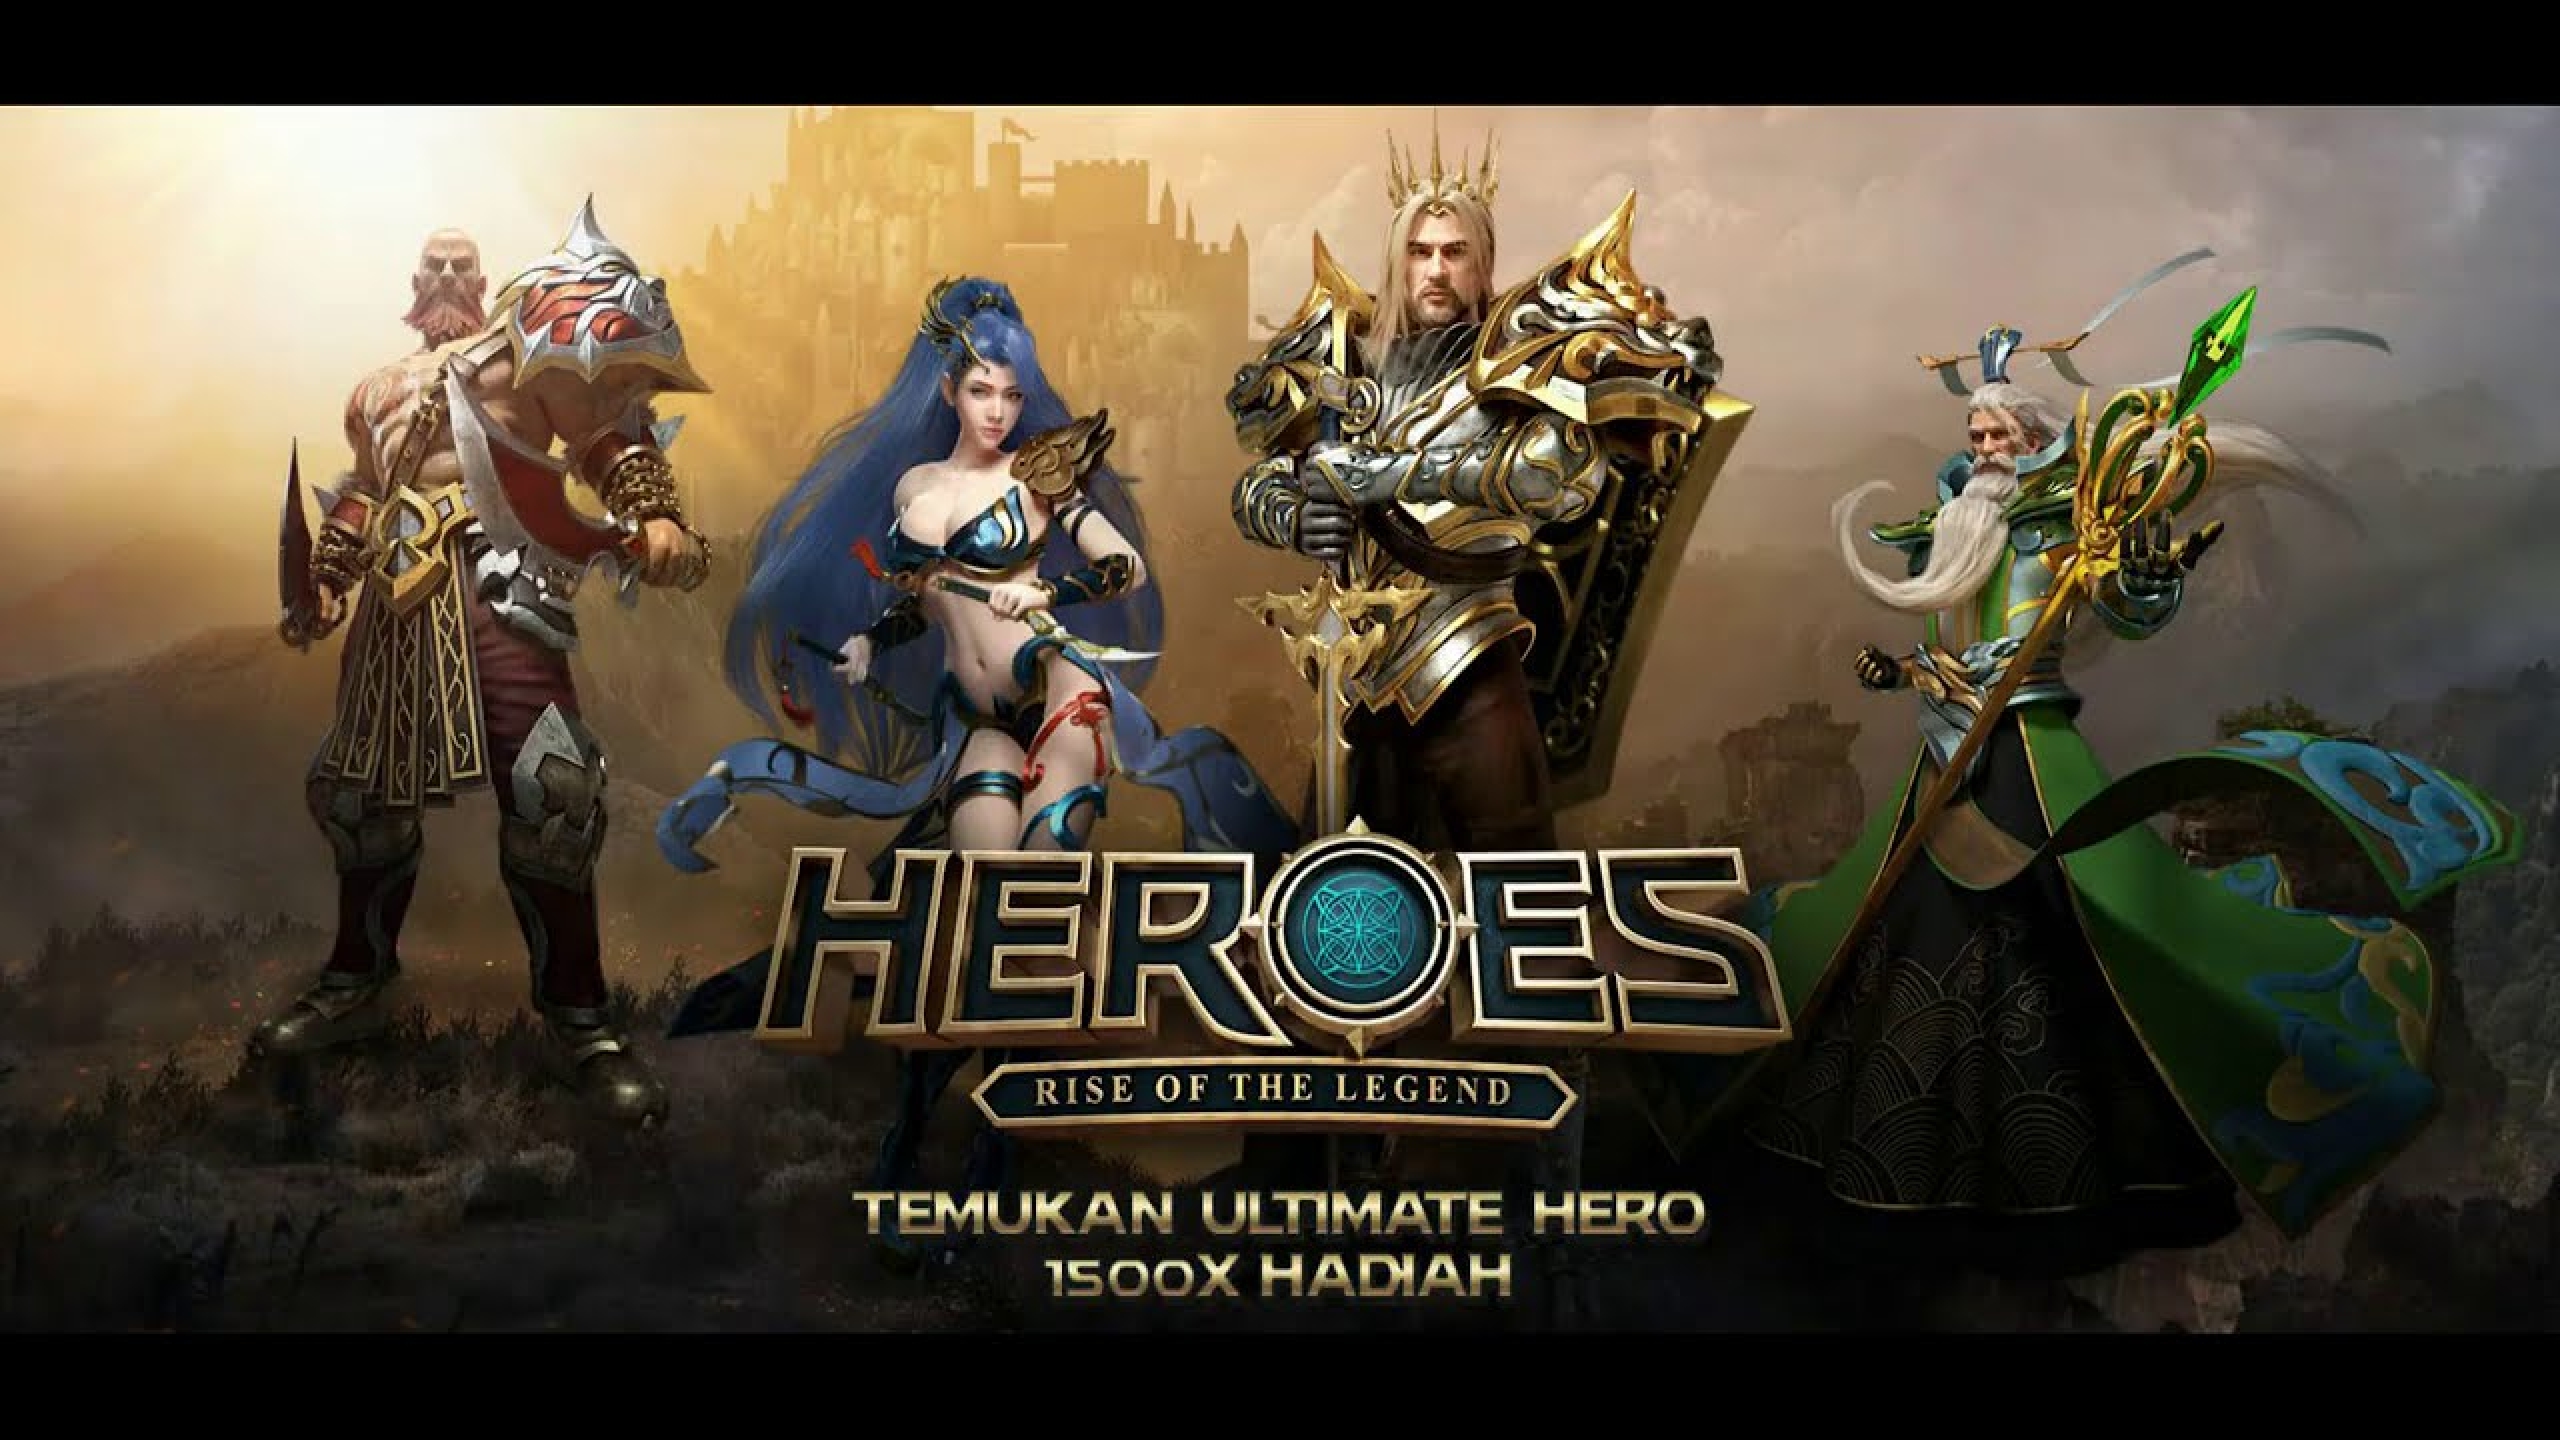 Heroes Rise of the Legend demo